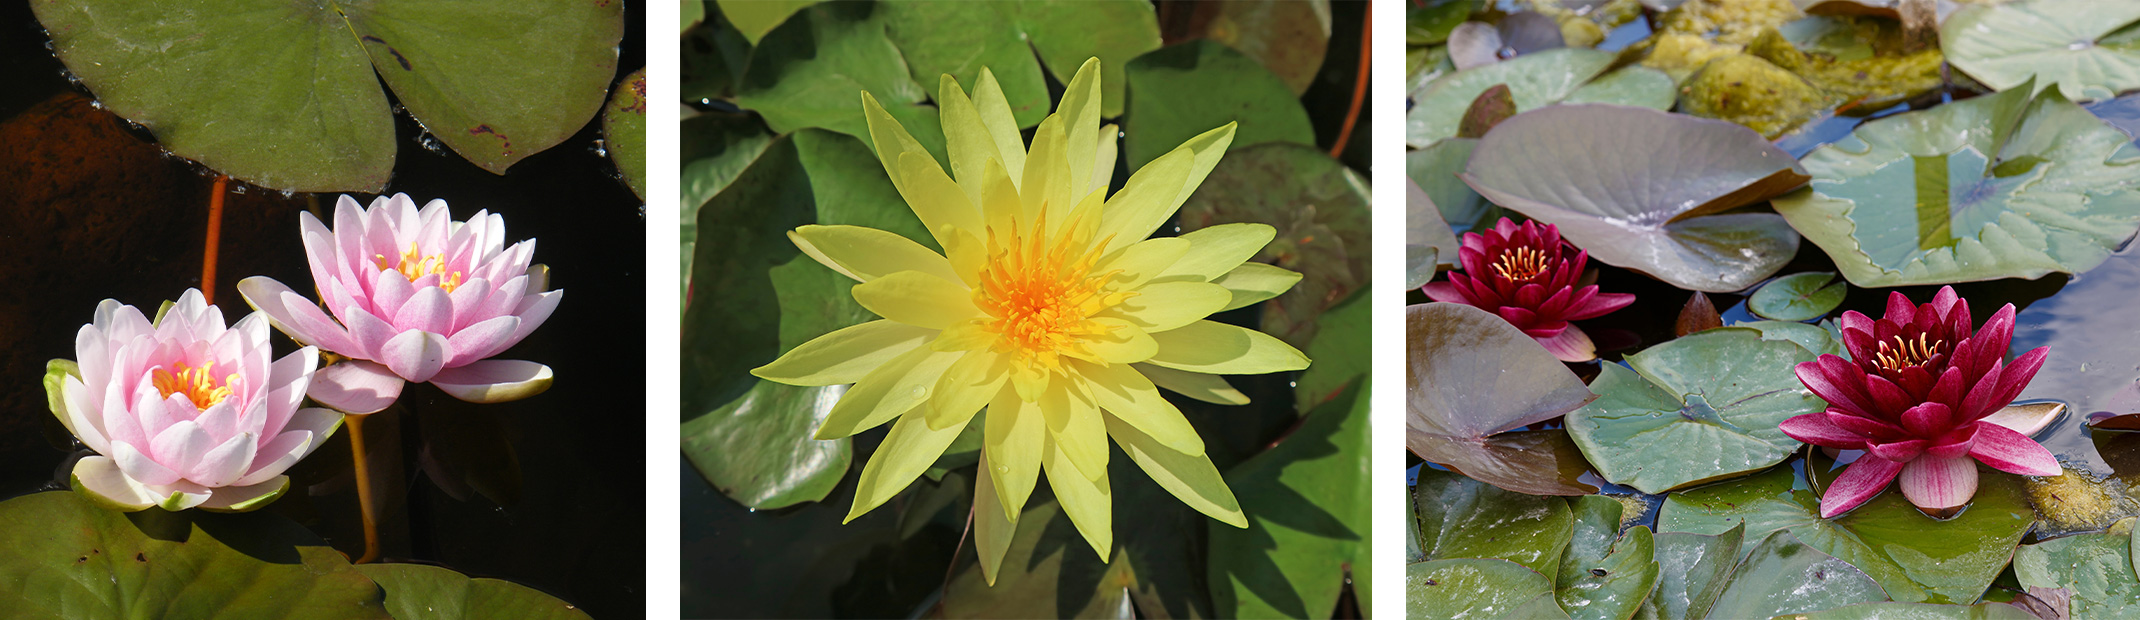 3 Water Lily Varieties: Nymphaea Madame Wilfron Gonnere. Nymphaea Joey Tomocik, and Nymphaea hybride Almost Black.